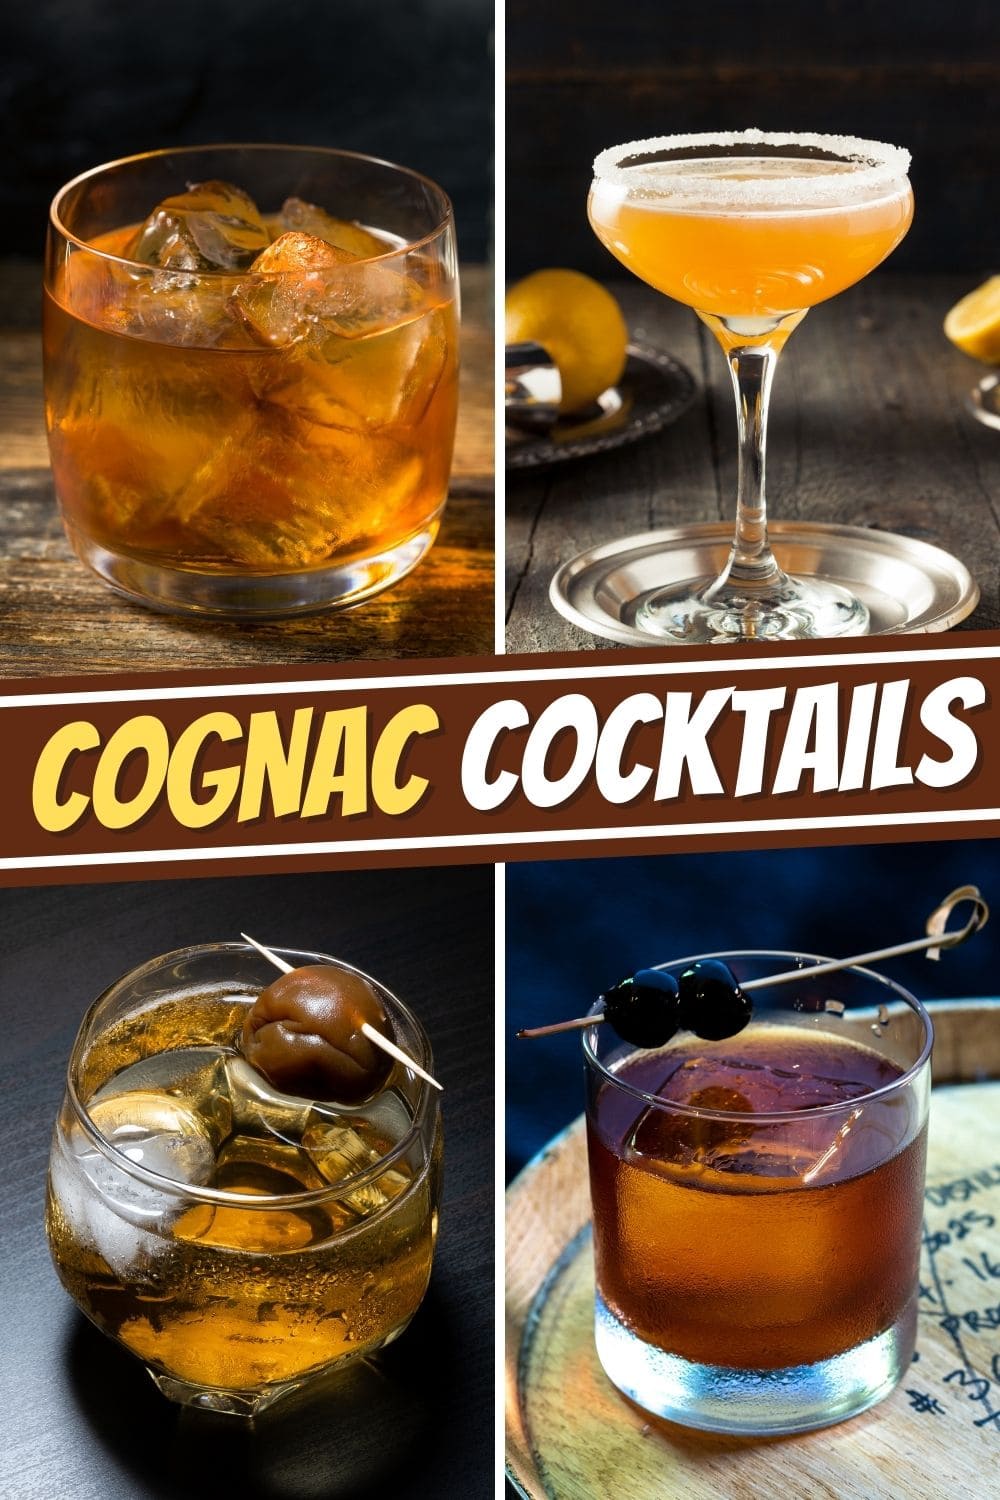 17 Easy Cognac Cocktails Insanely Good